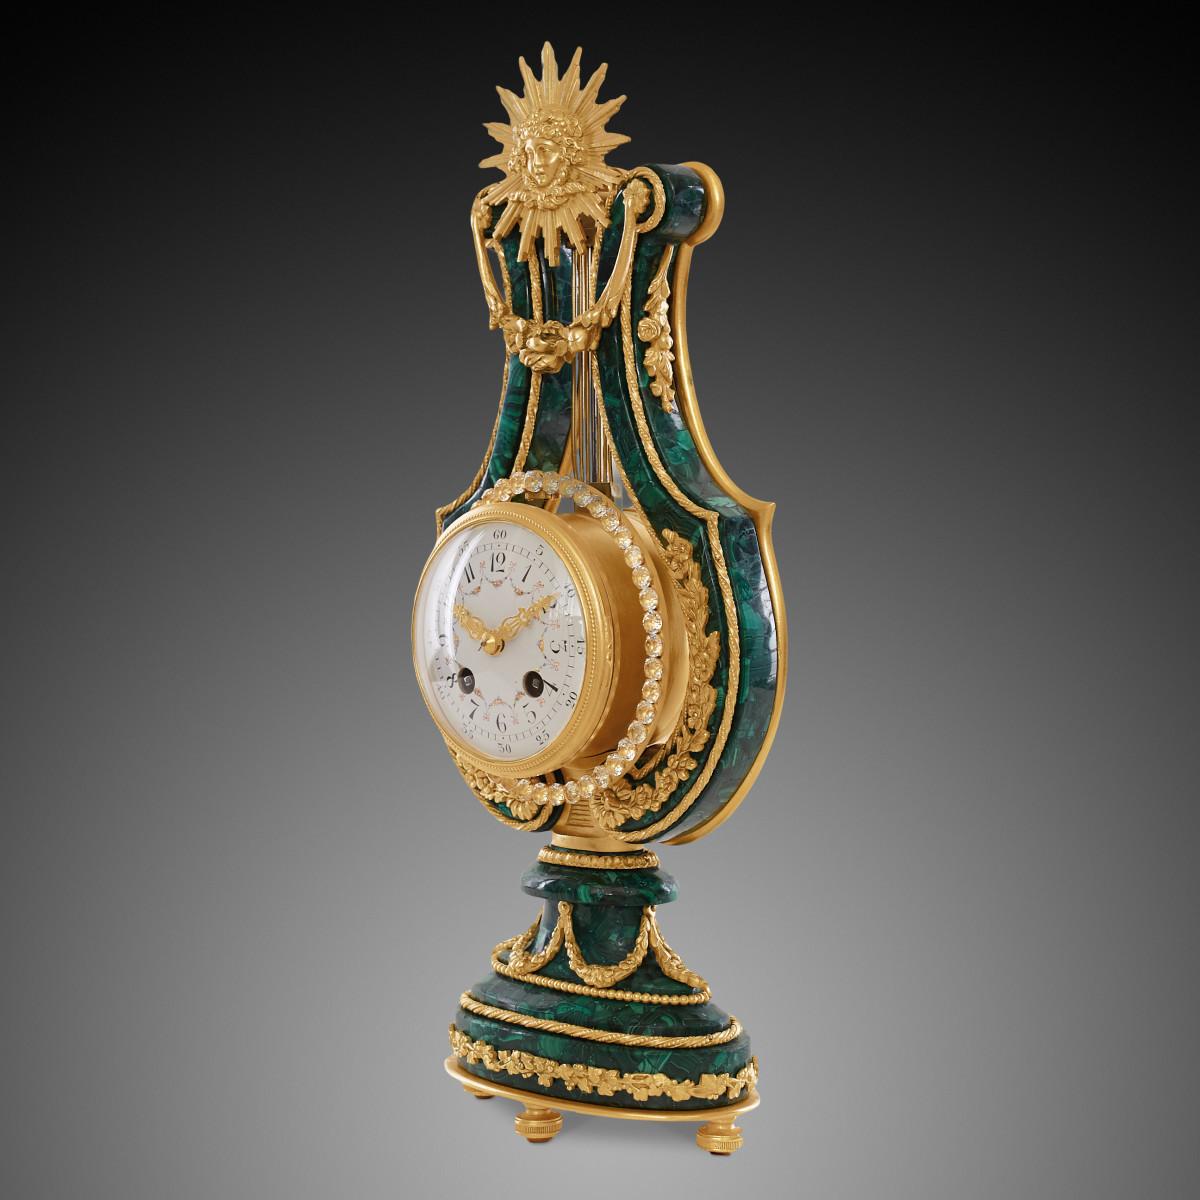 French A of mantel clock in the style of Louis XVI, the 19th century.